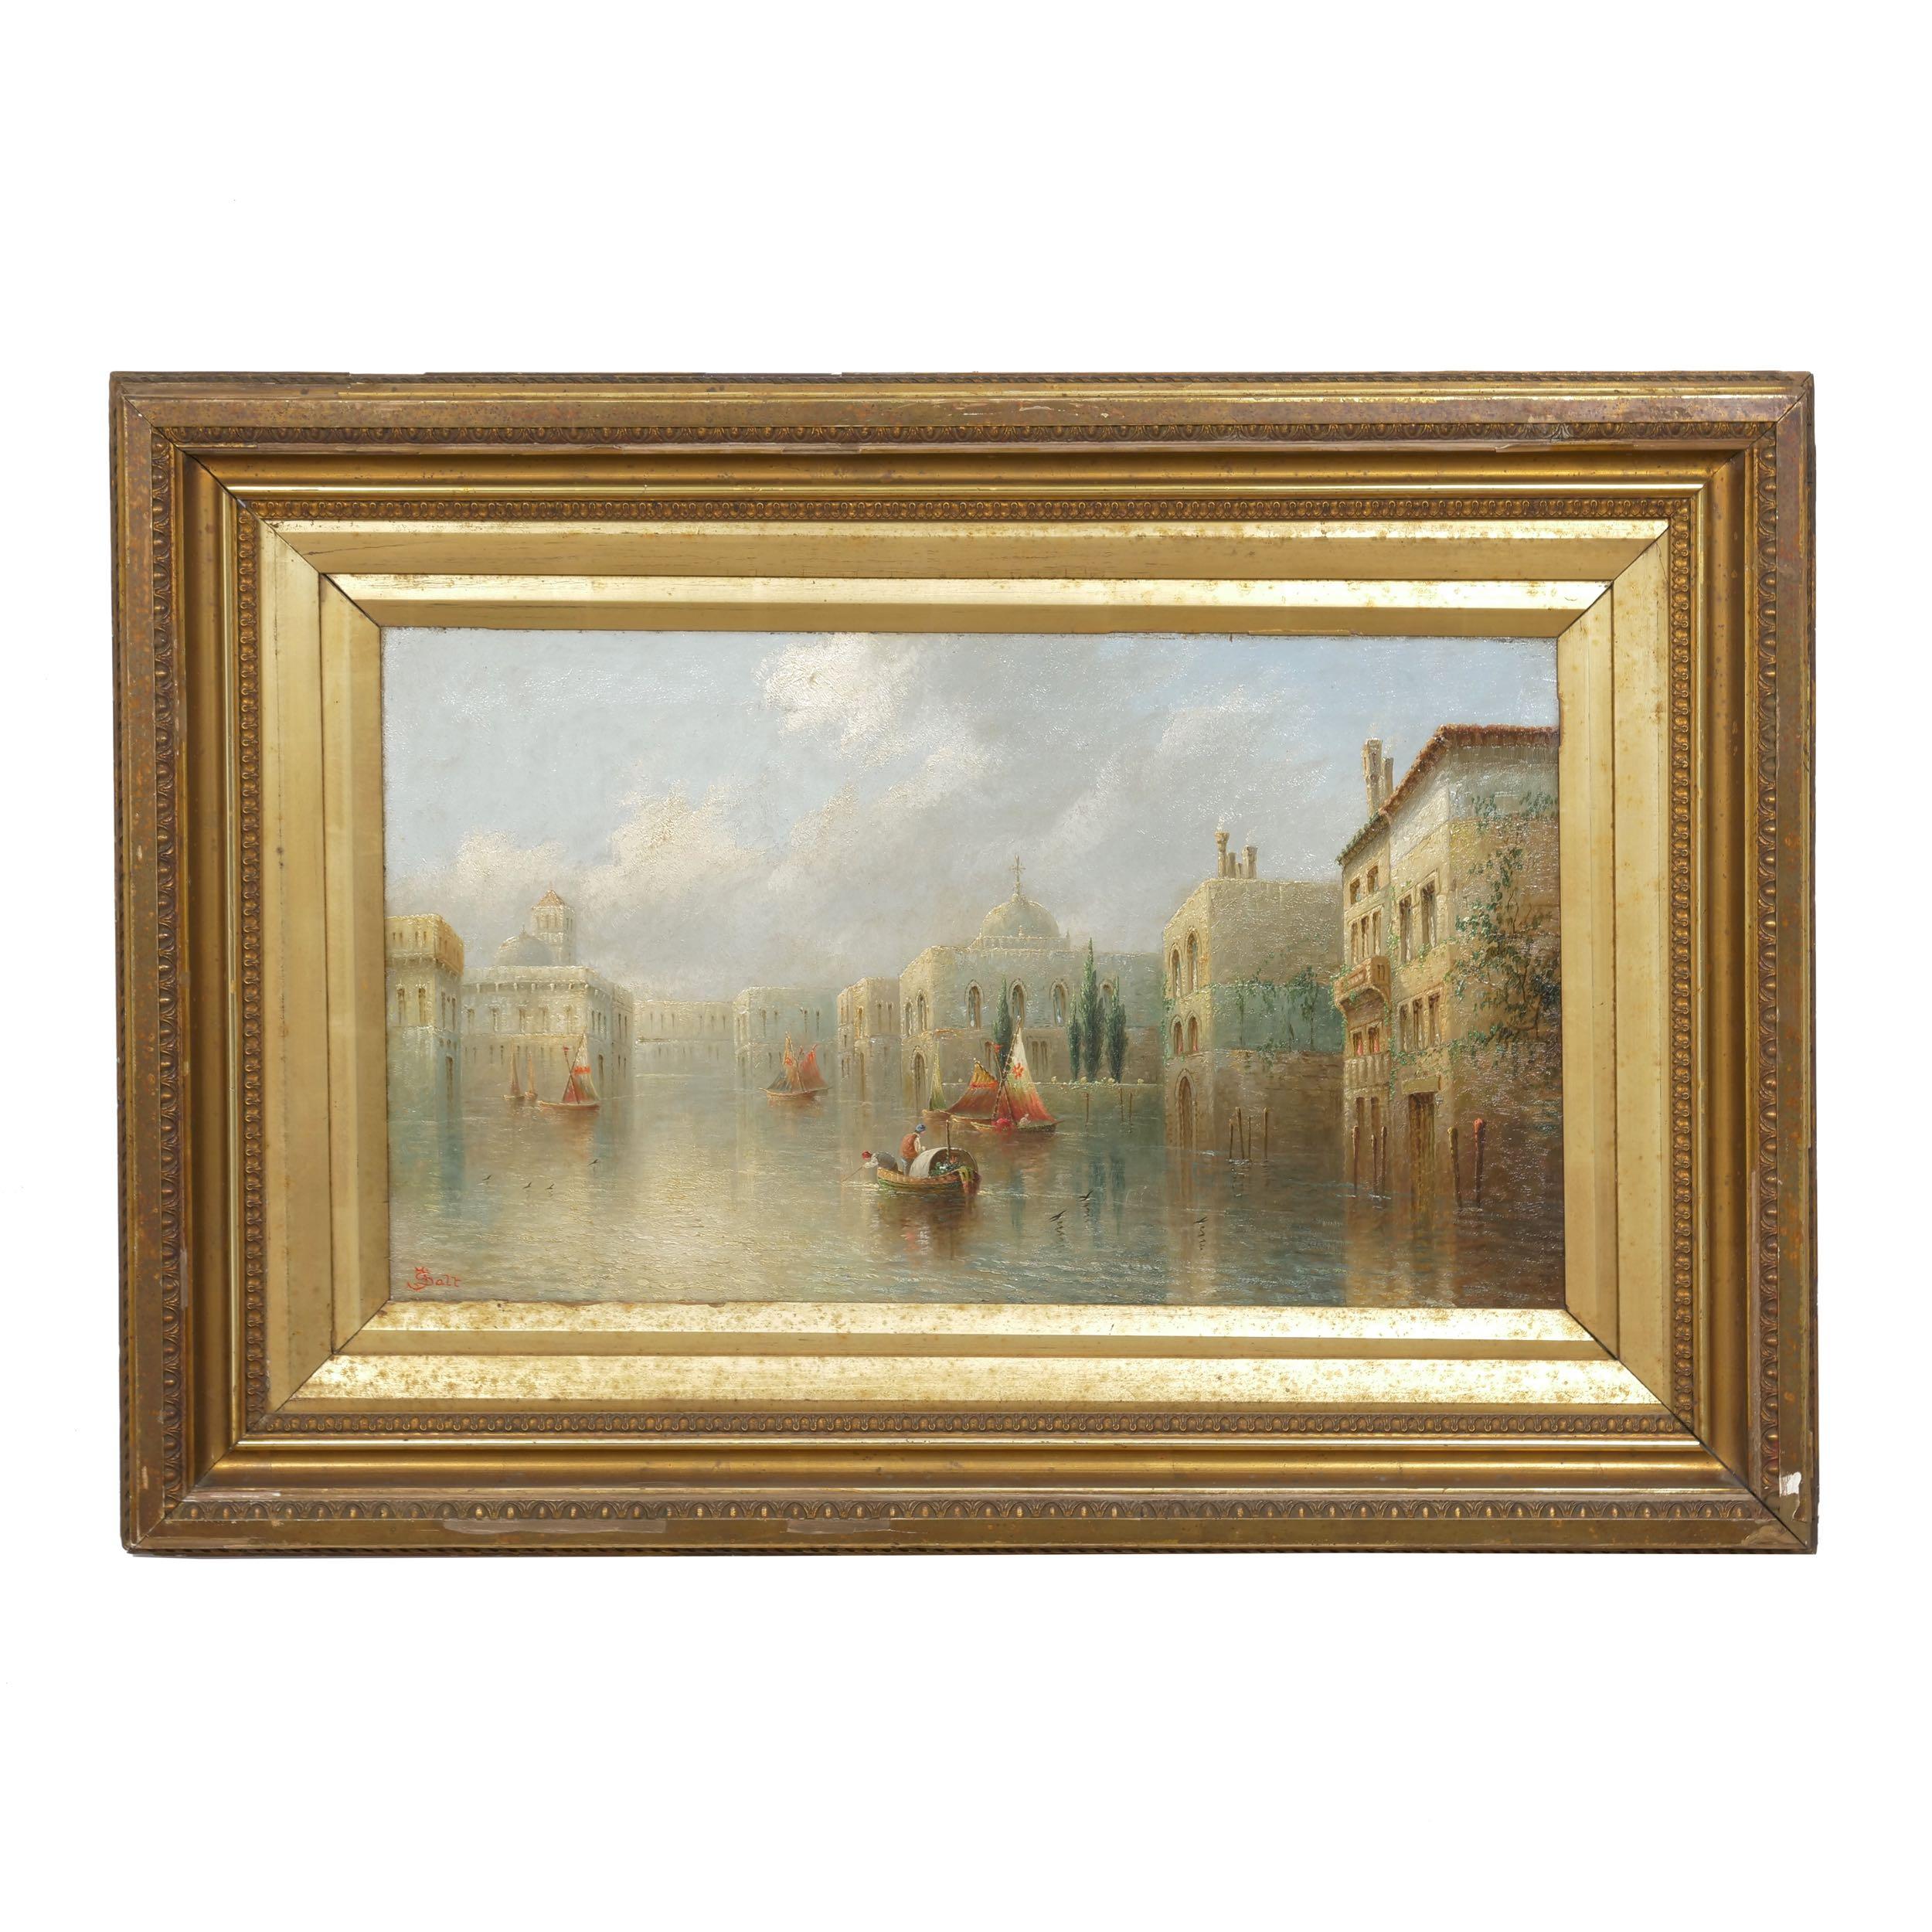 As a specialist in these Capriccio scenes, James Salt became well known for his imagined and idealized views of Venice. His hand is quickly recognizable with the vivid use of translucent and nearly pastel colors and a highly atmospheric handling of